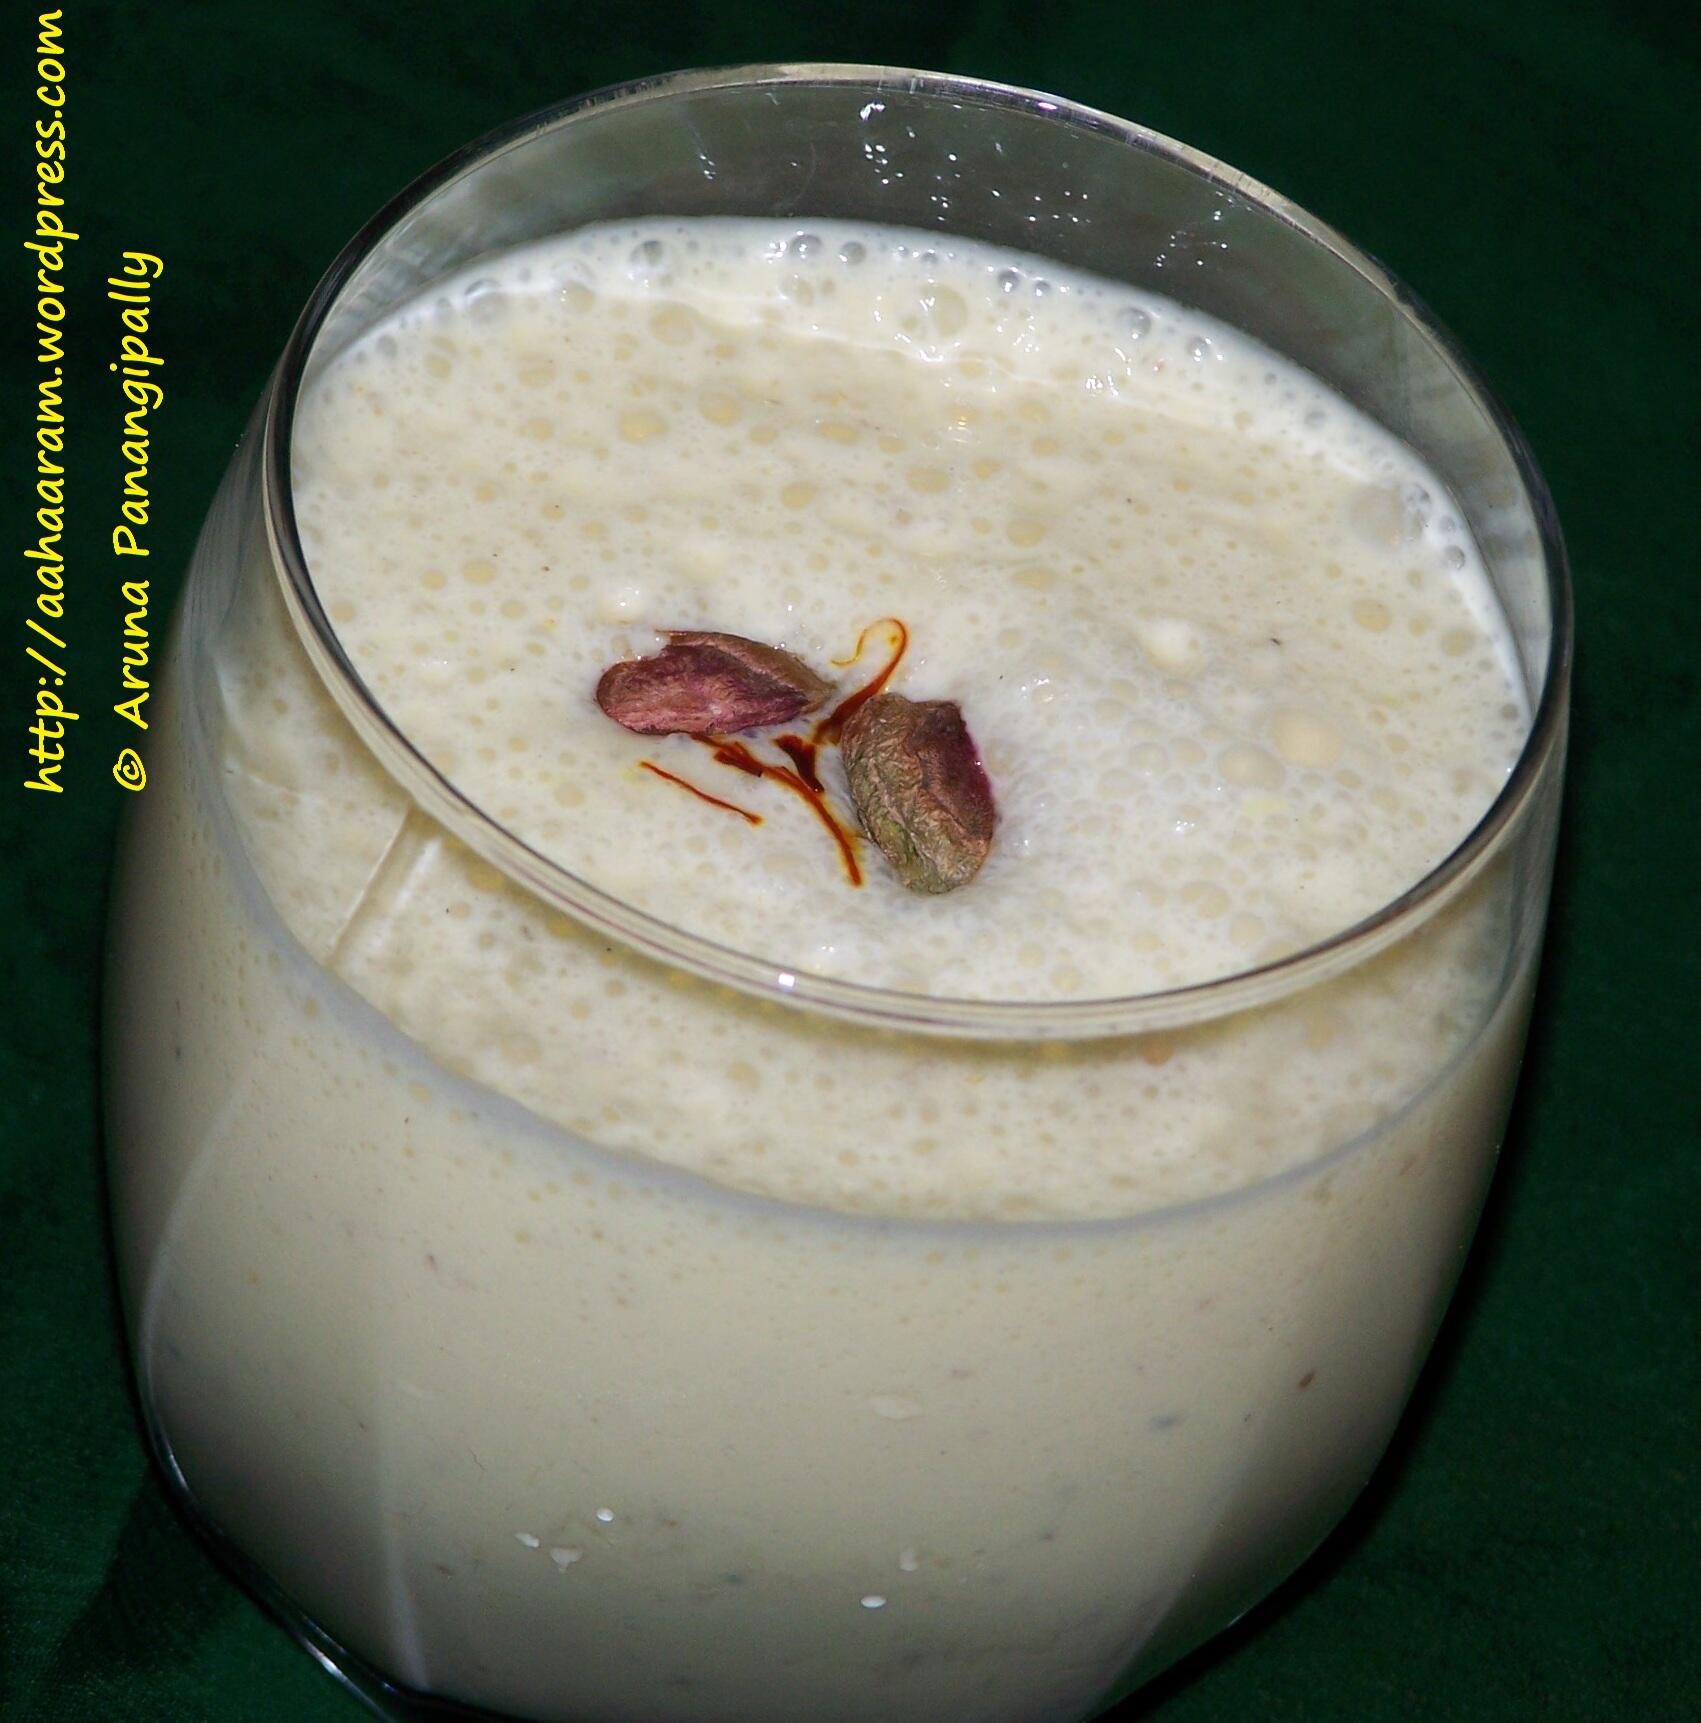 Piyush is a drink made with Shrikhand